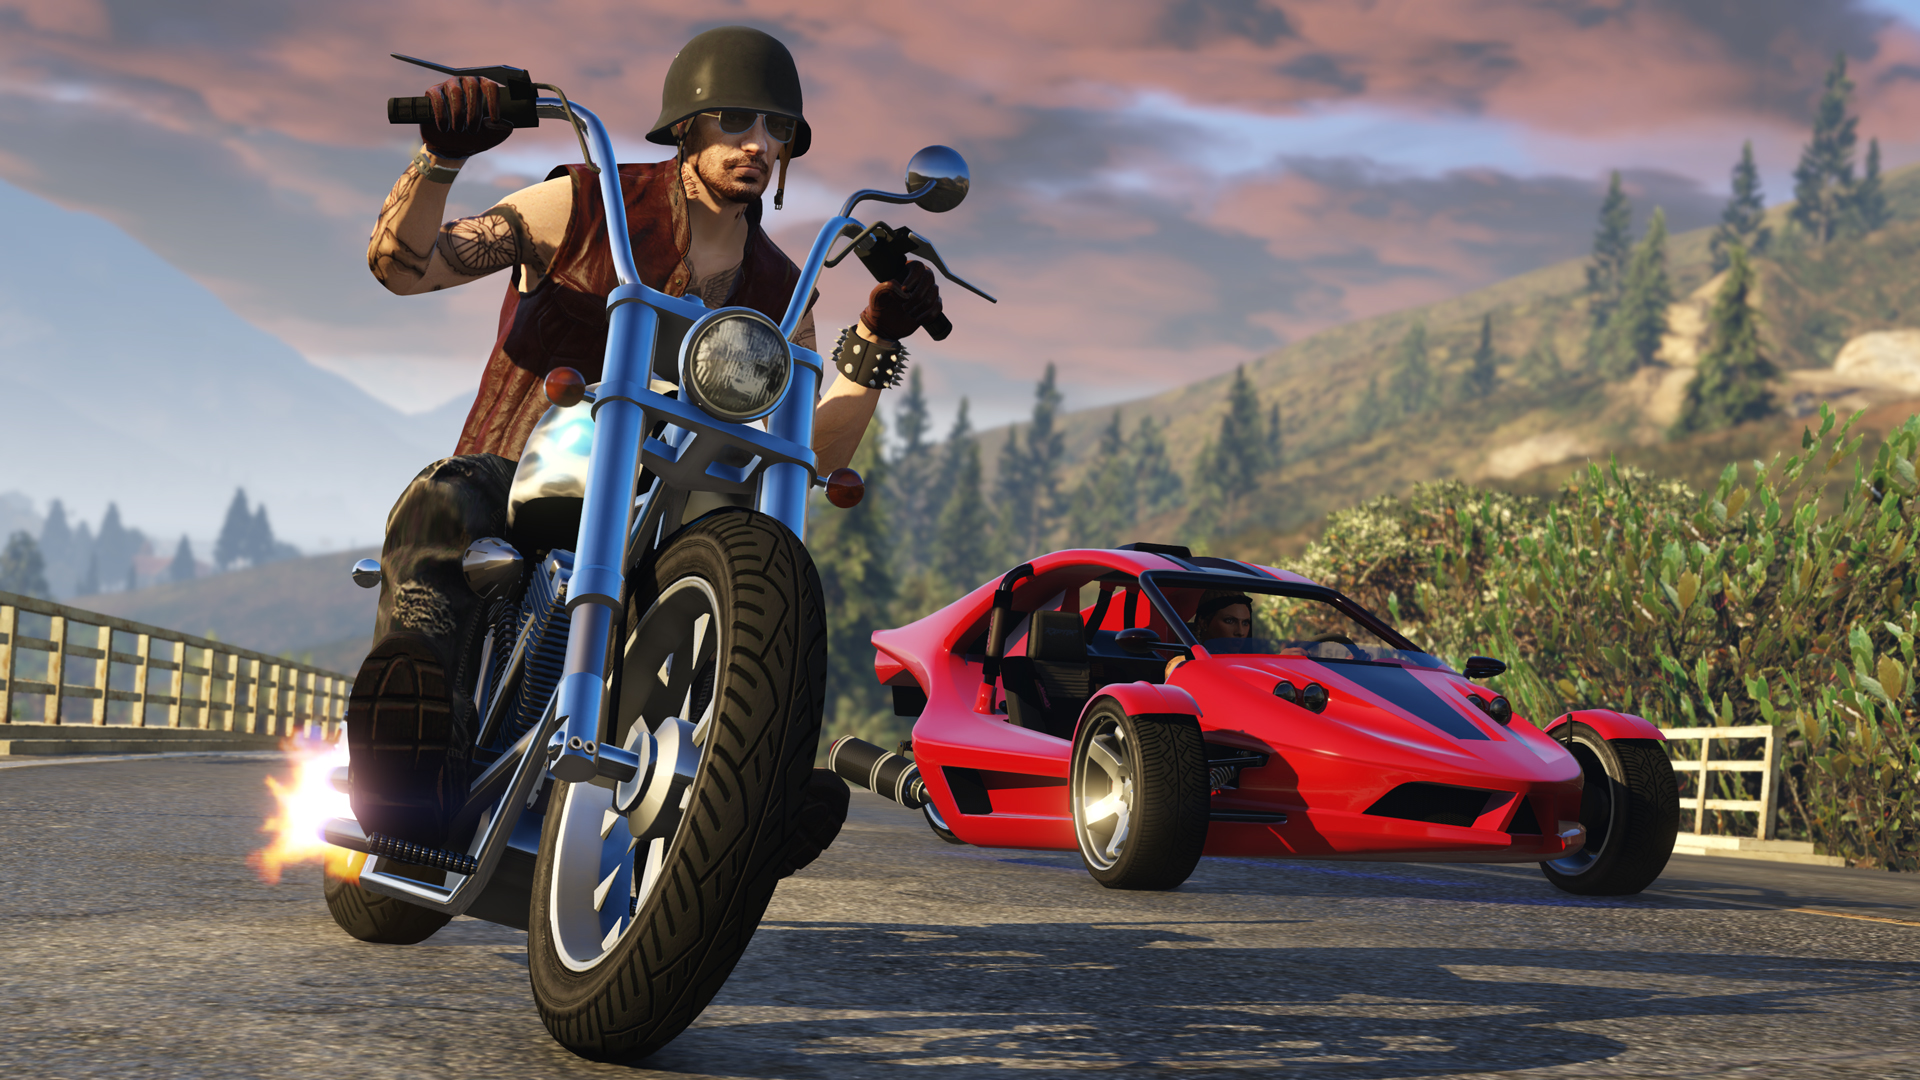 Afdaling staking Zachtmoedigheid GTA Online: Bikers Update - Two New Vehicles and Sixth Purchasable Property  Now Available - Rockstar Games